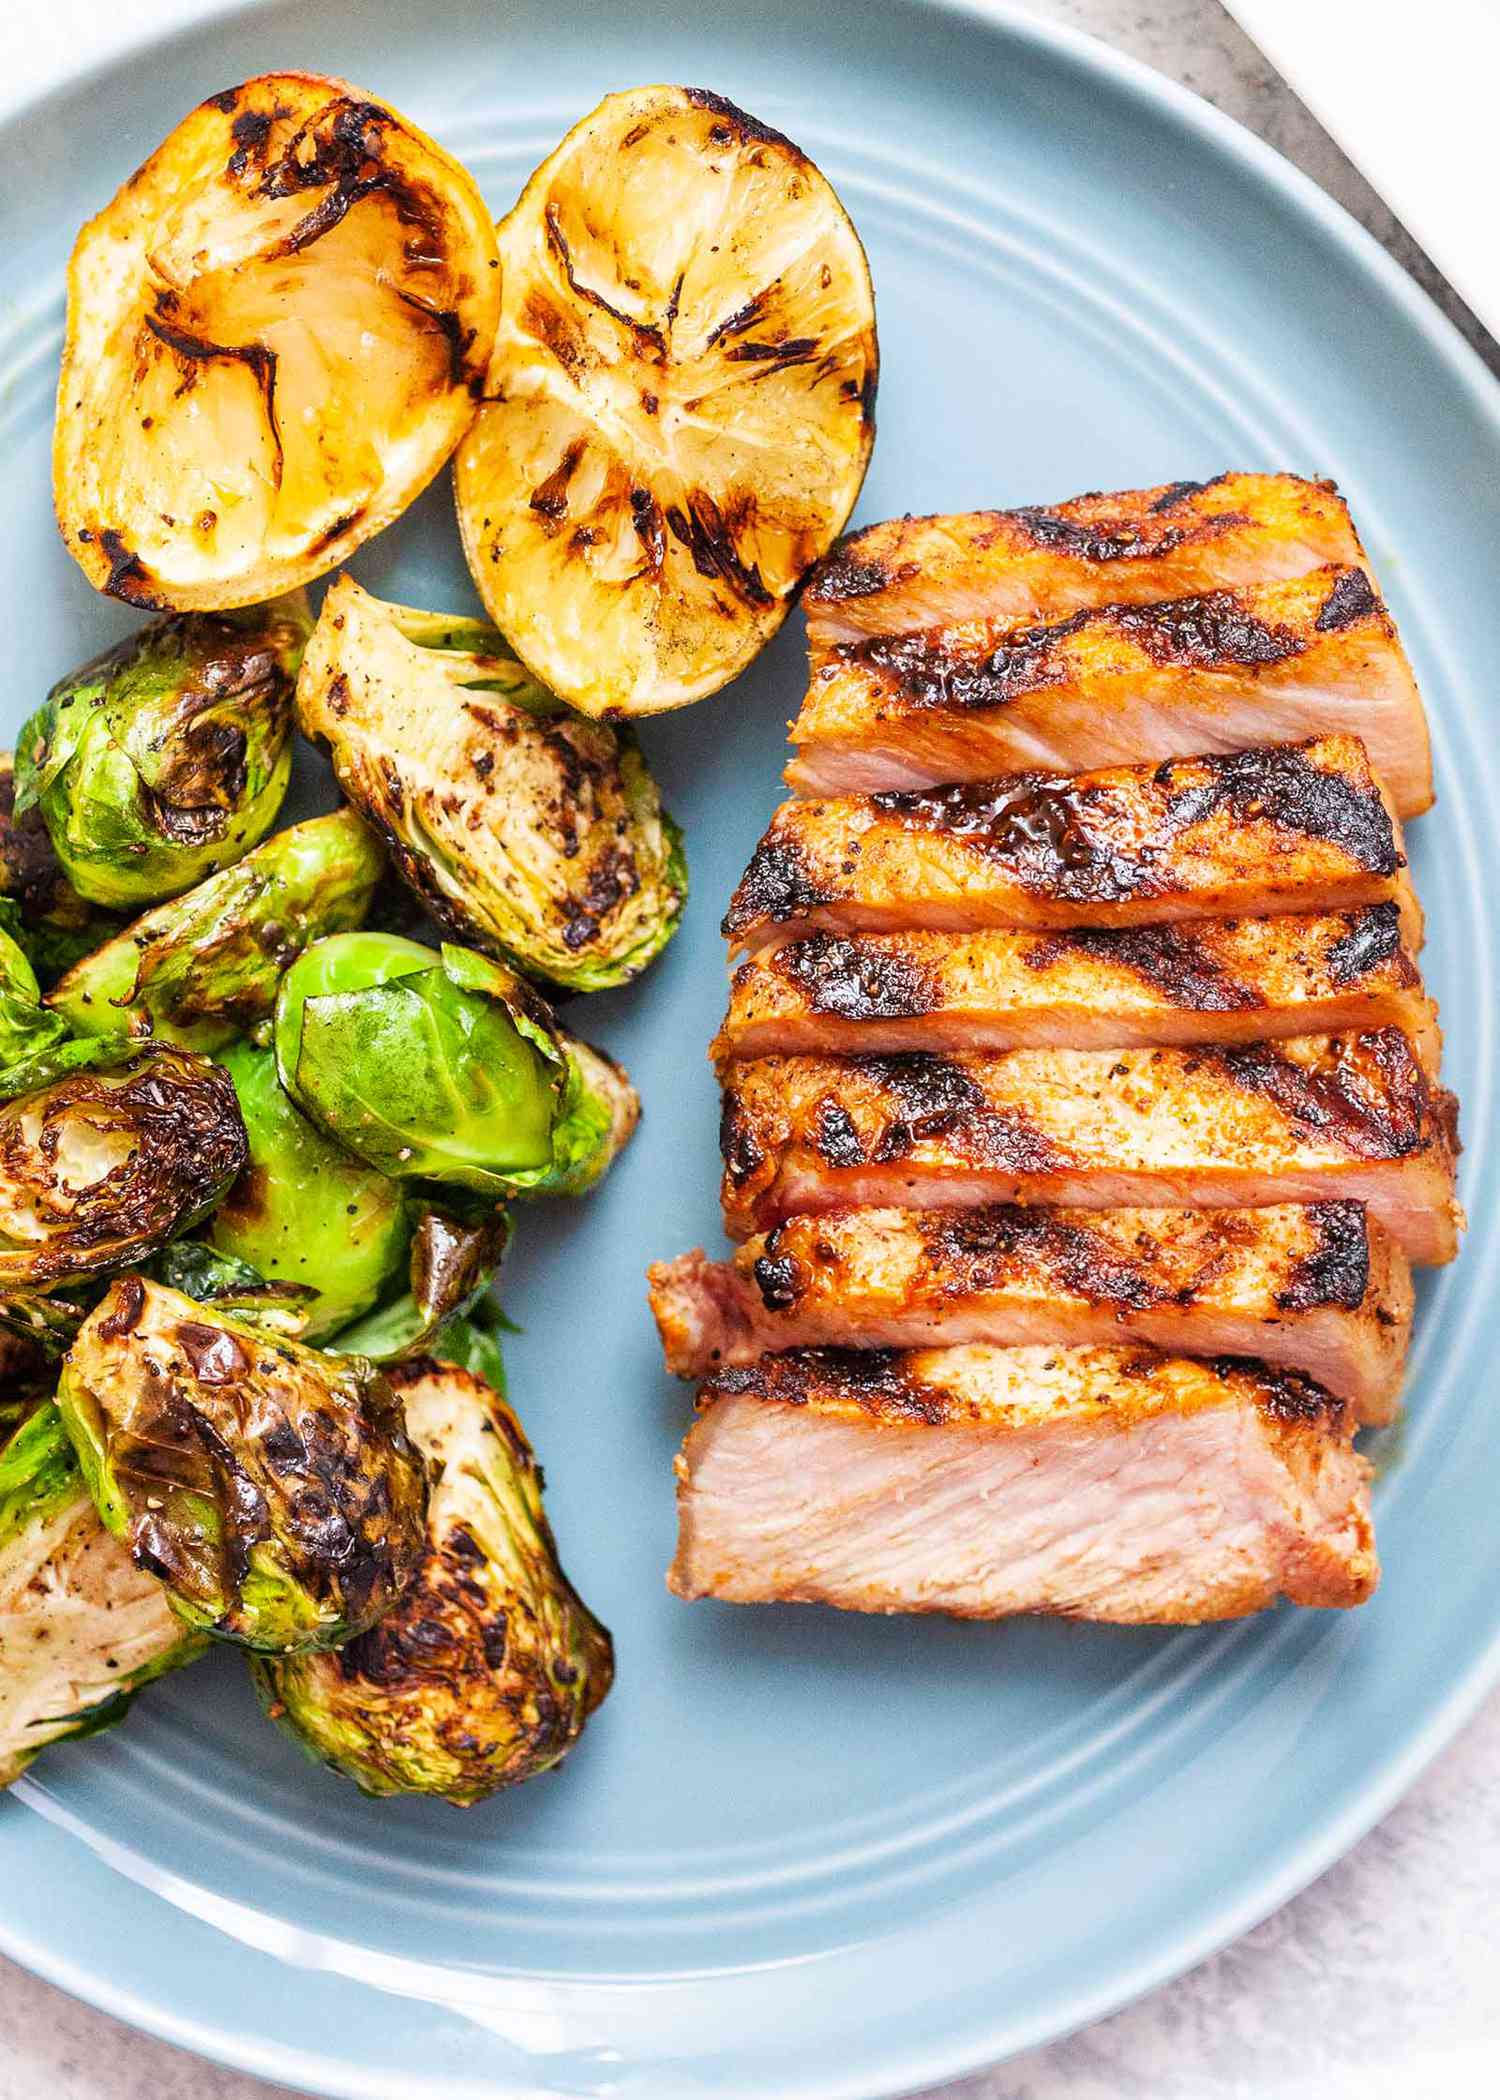 Citrus Pork Chops on the Grill